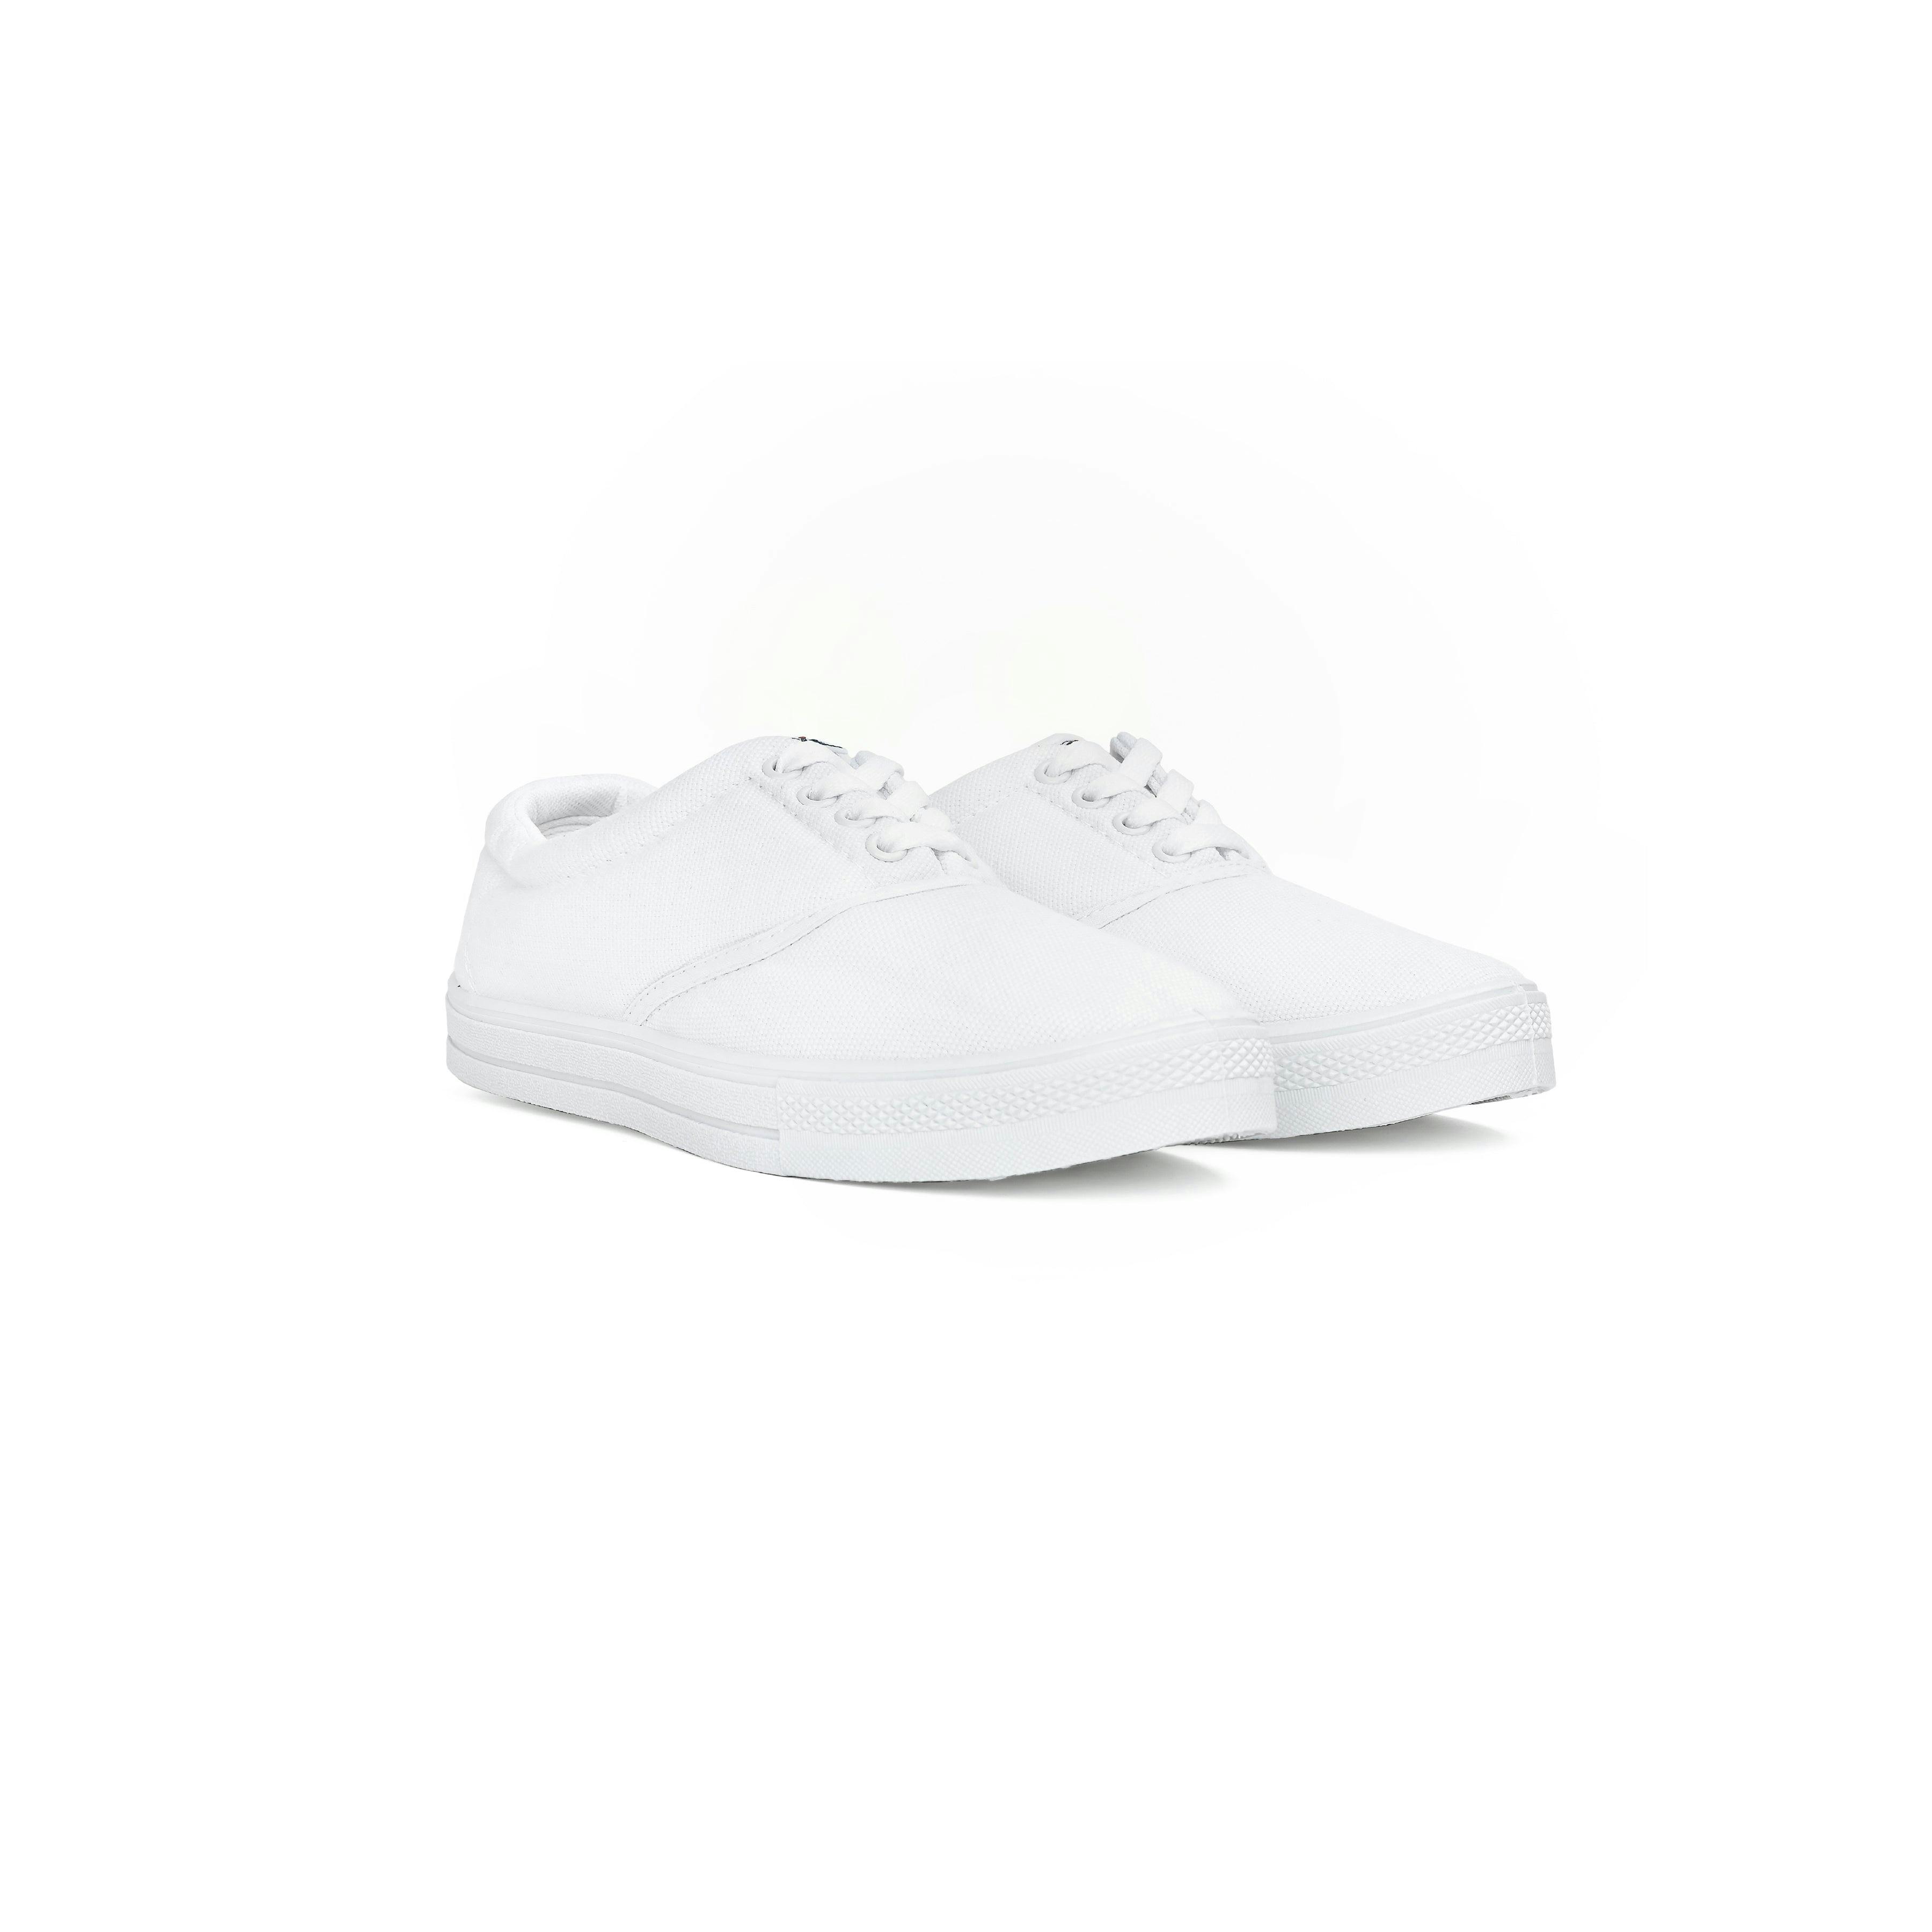 a pair of white sport shoes = 3 of 7